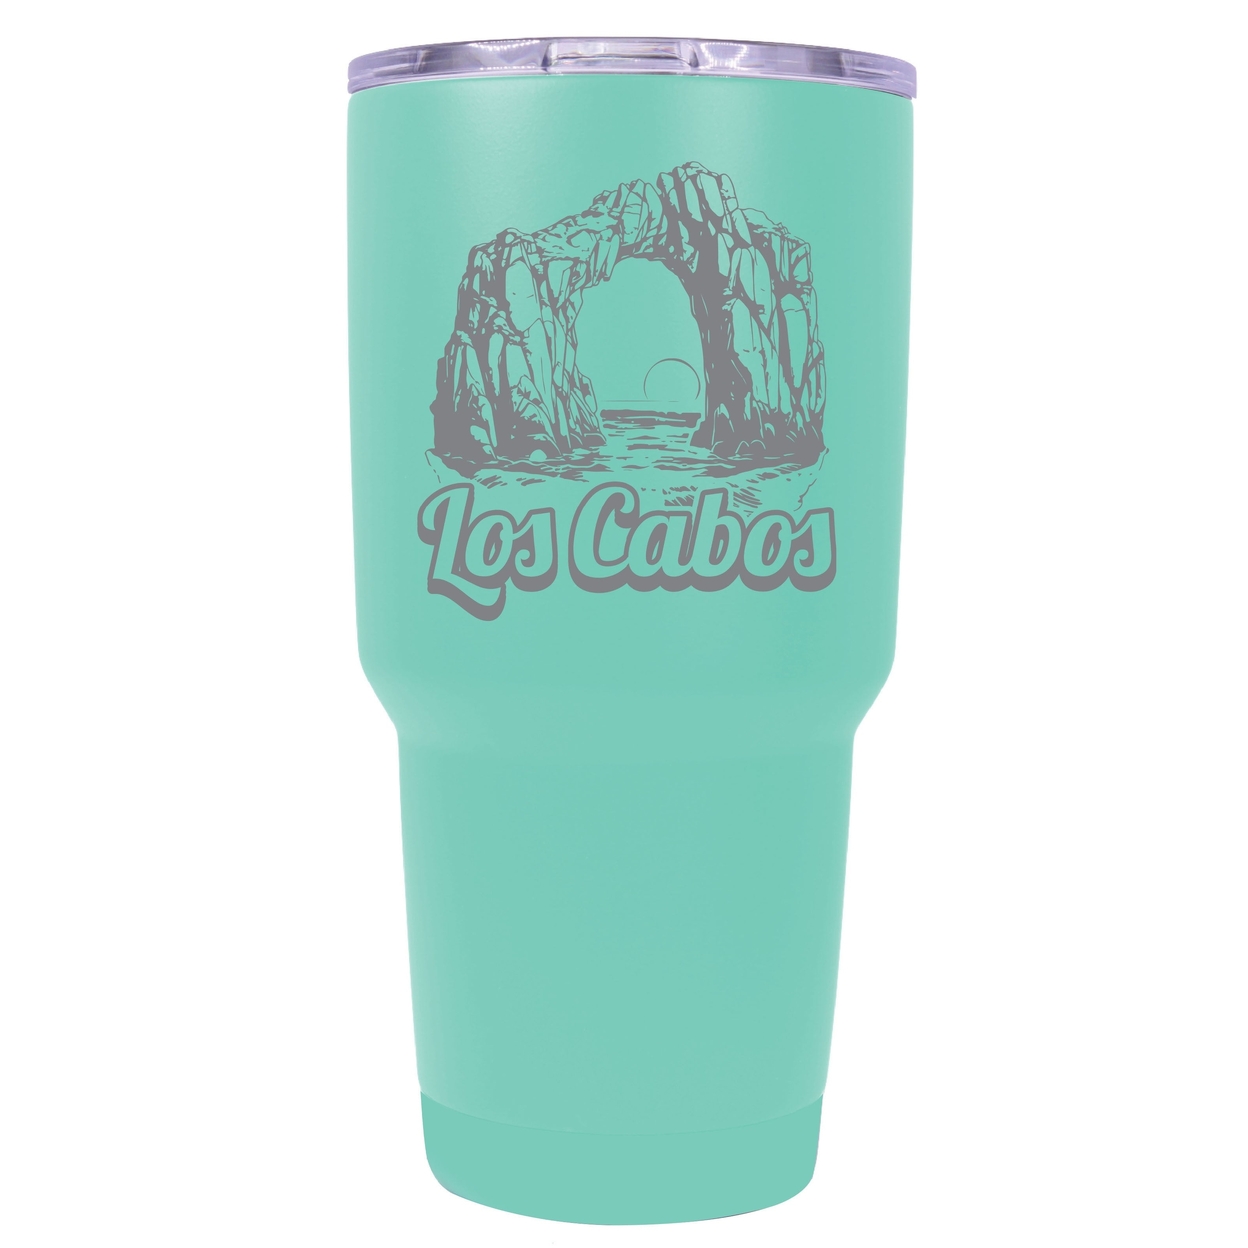 Los Cabos Mexico Souvenir 24 Oz Engraved Insulated Stainless Steel Tumbler - Seafoam,,4-Pack